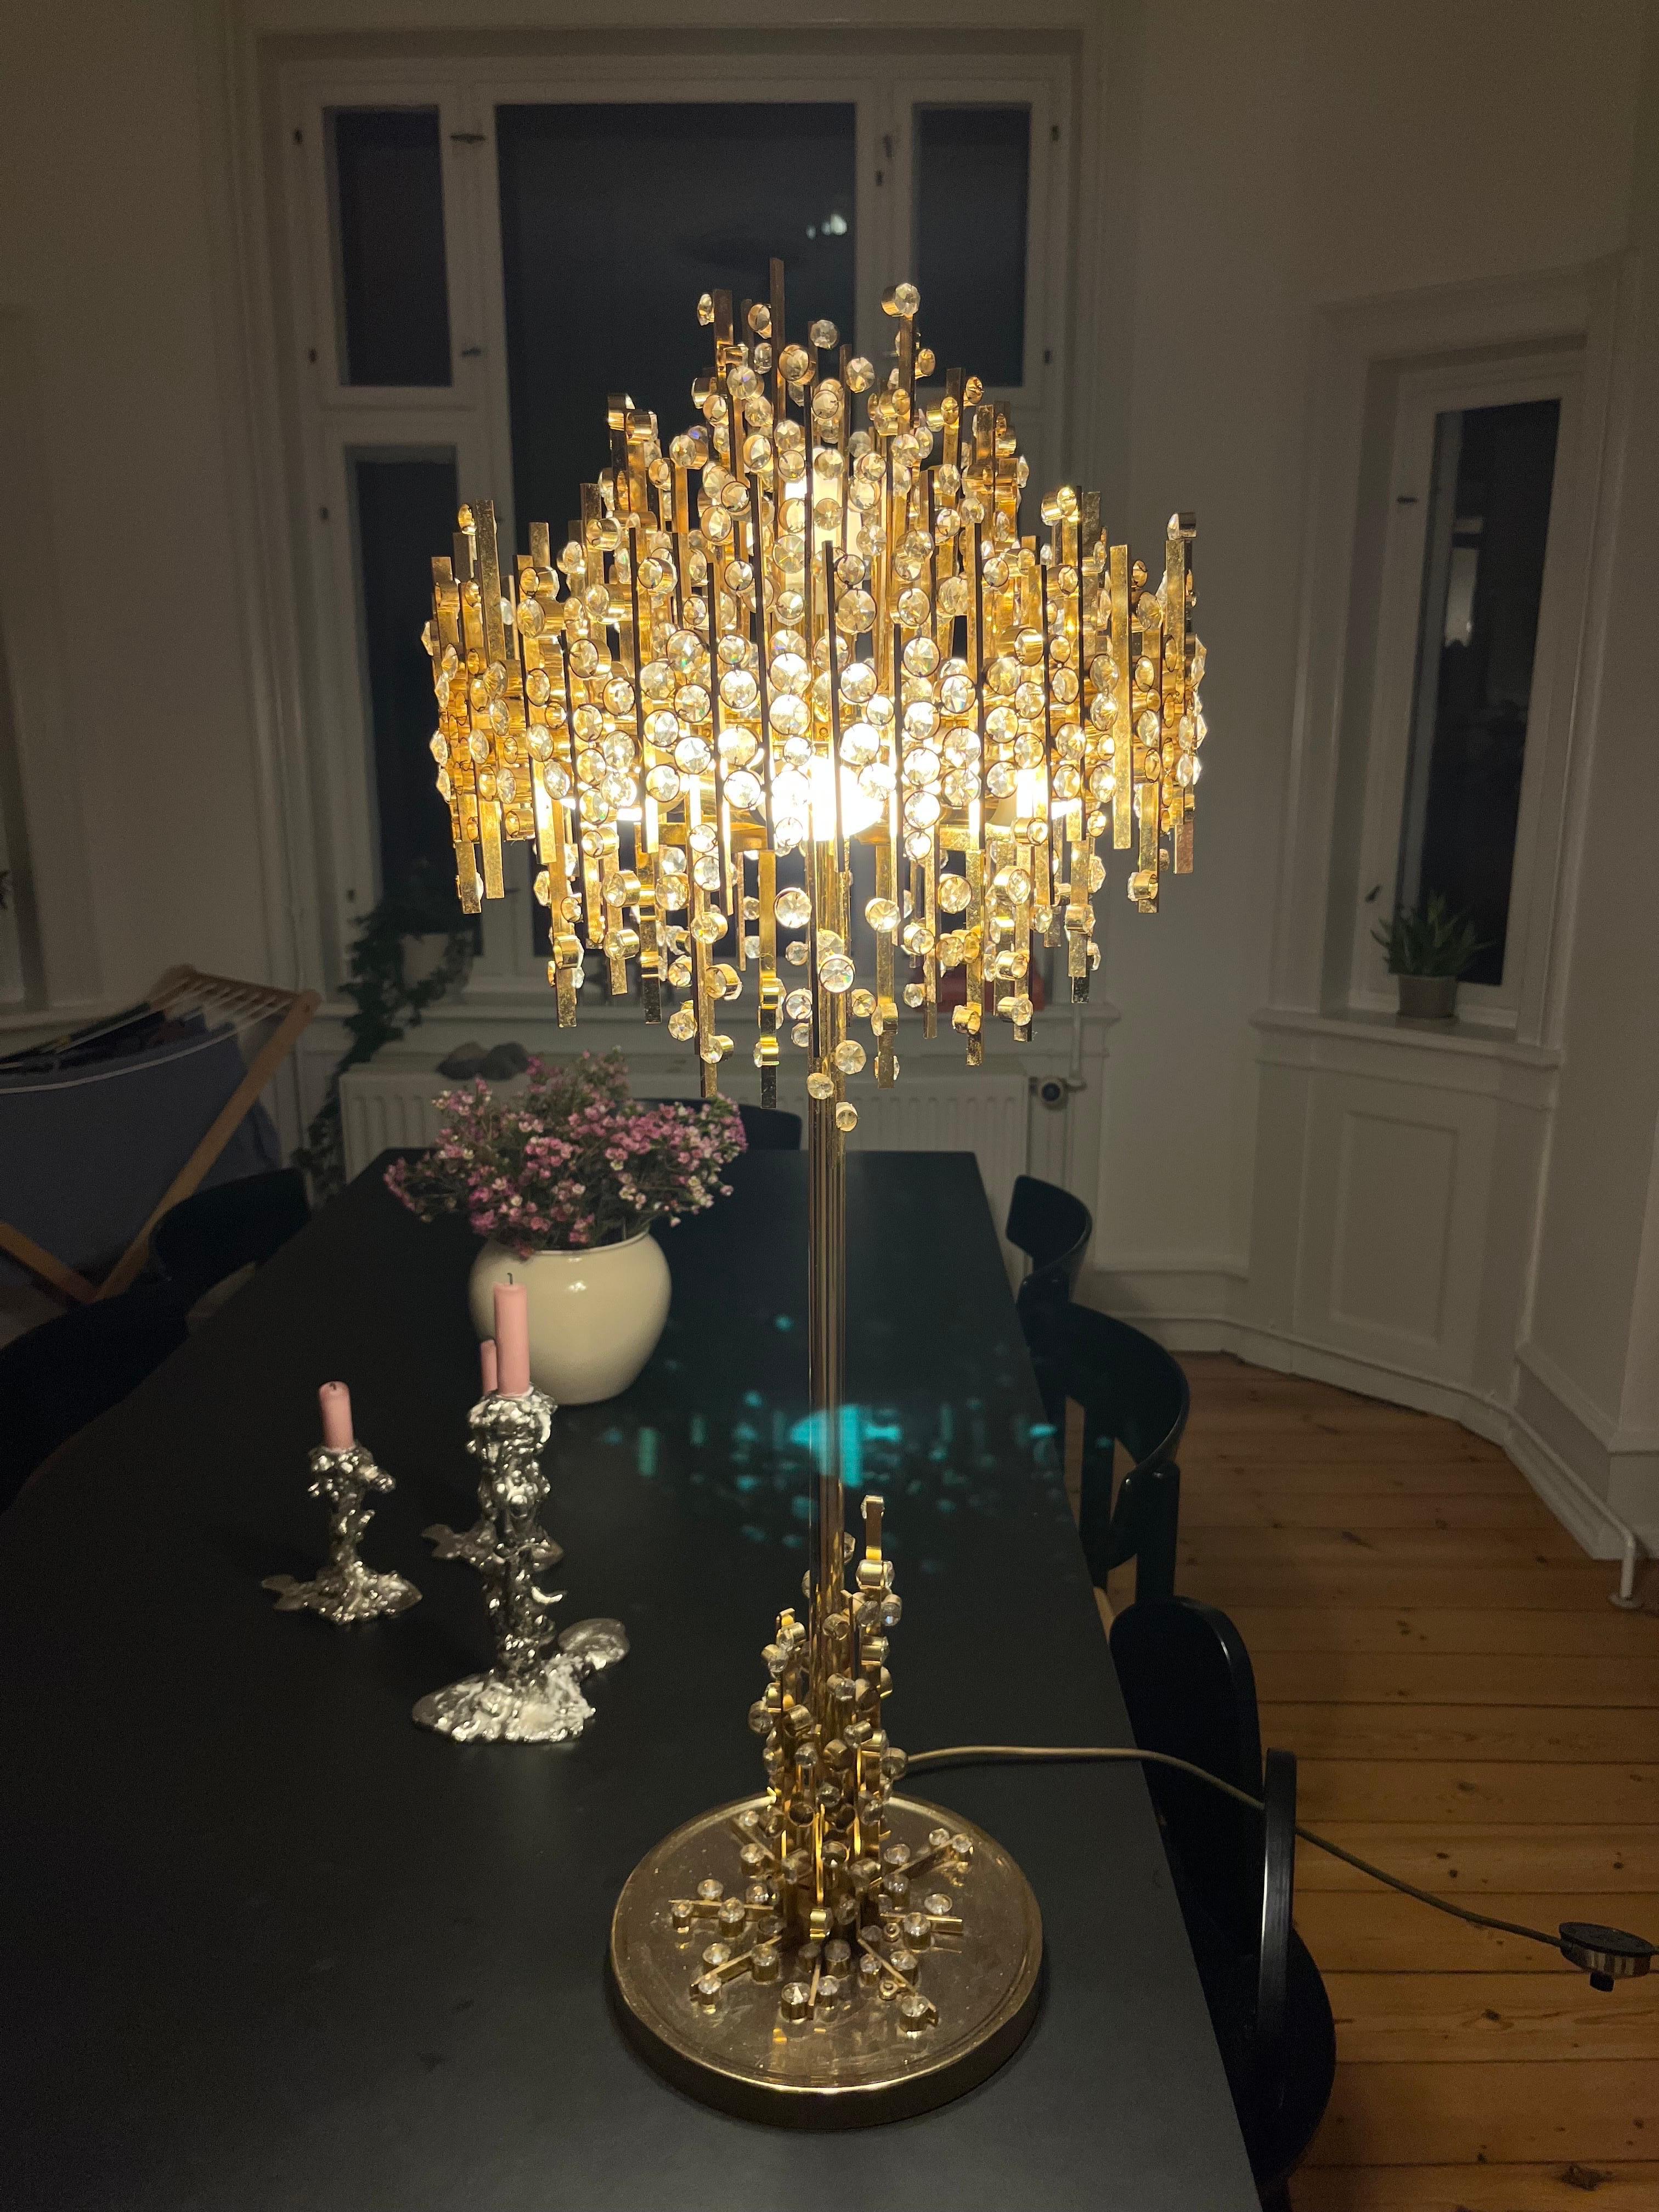 Large and impressive Palwa lamp in metal gilt with gold setting of numerous diamond cut crystal by Palwa 1970s Austria.
Outstanding tall piece can be used as a floor lamp or table lamp.
